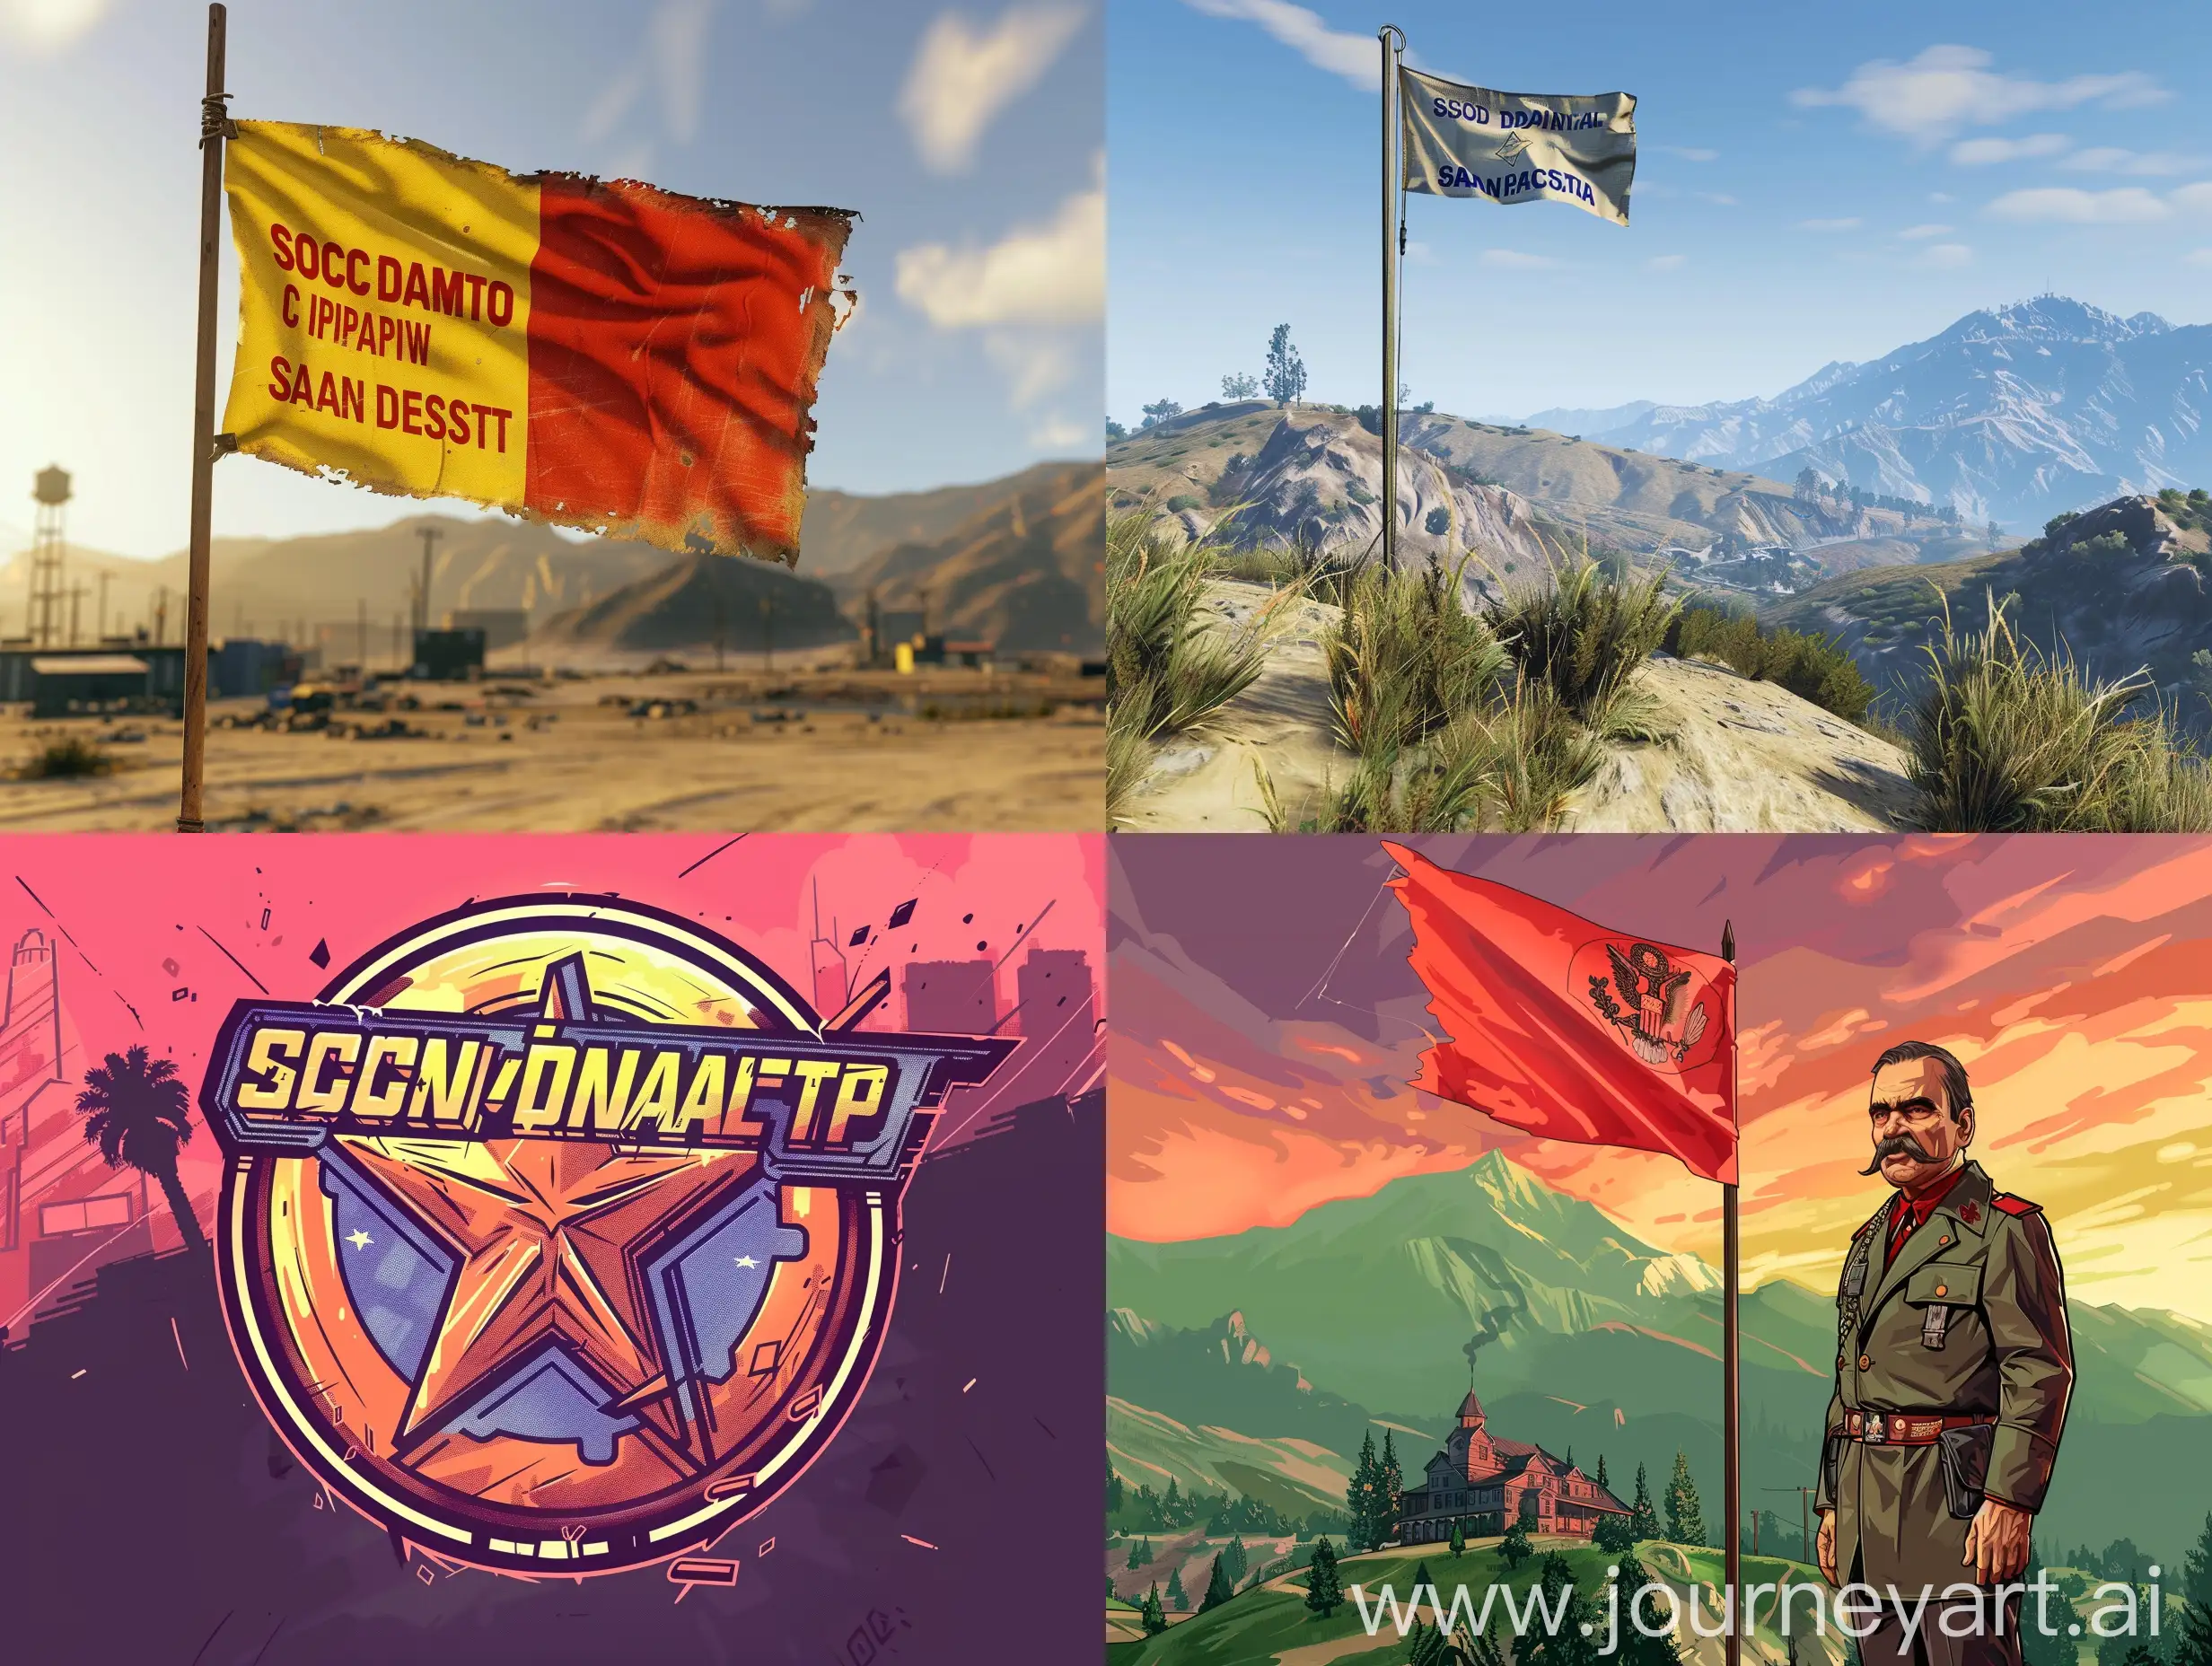 Social-Democratic-Party-of-San-Andreas-State-Banner-Vibrant-Discord-Promotion